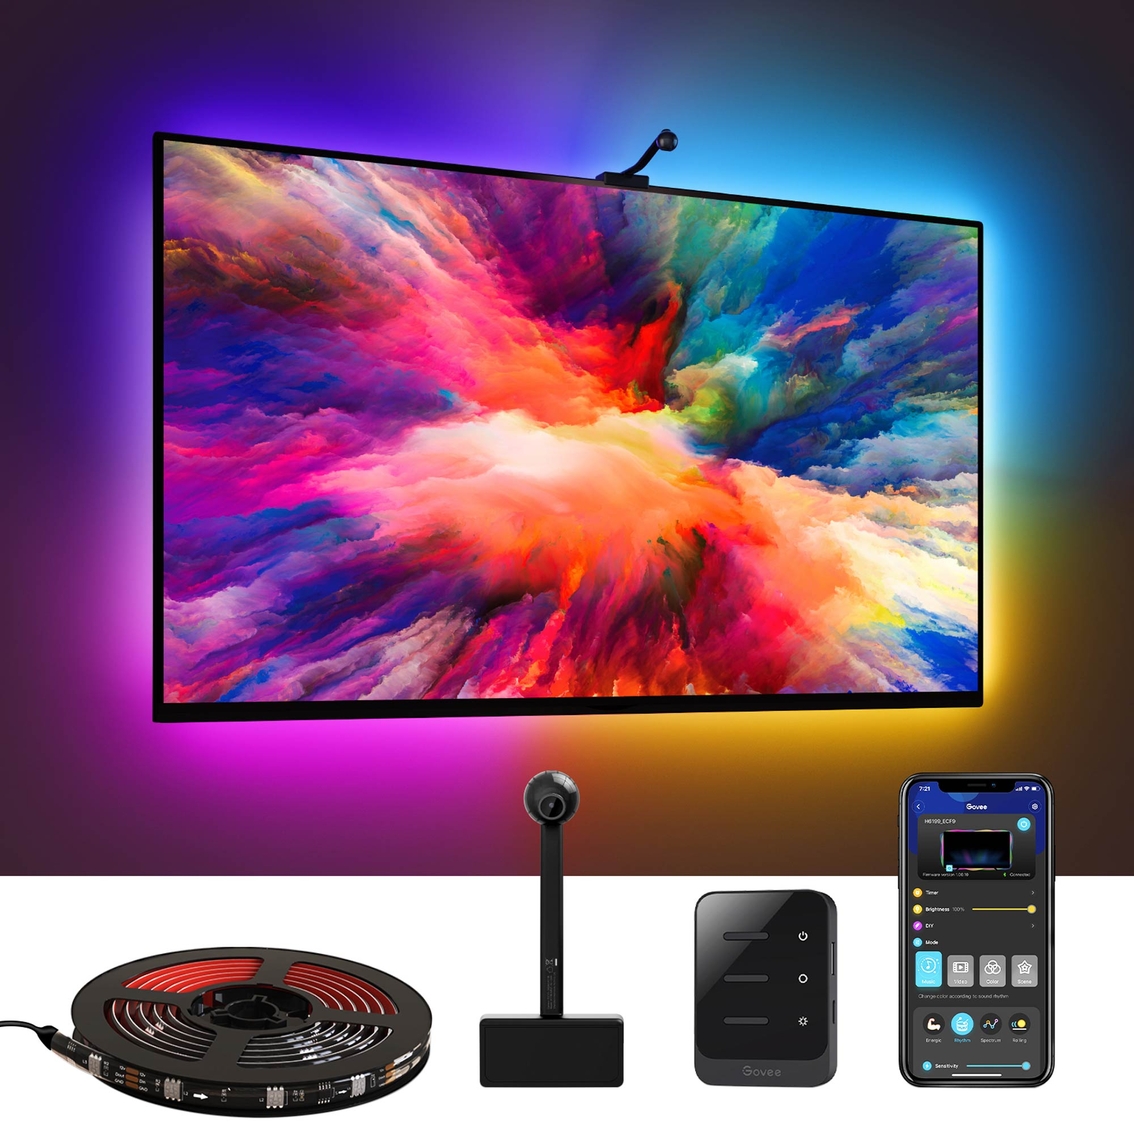 Govee DreamView T1 TV Backlight - Govee